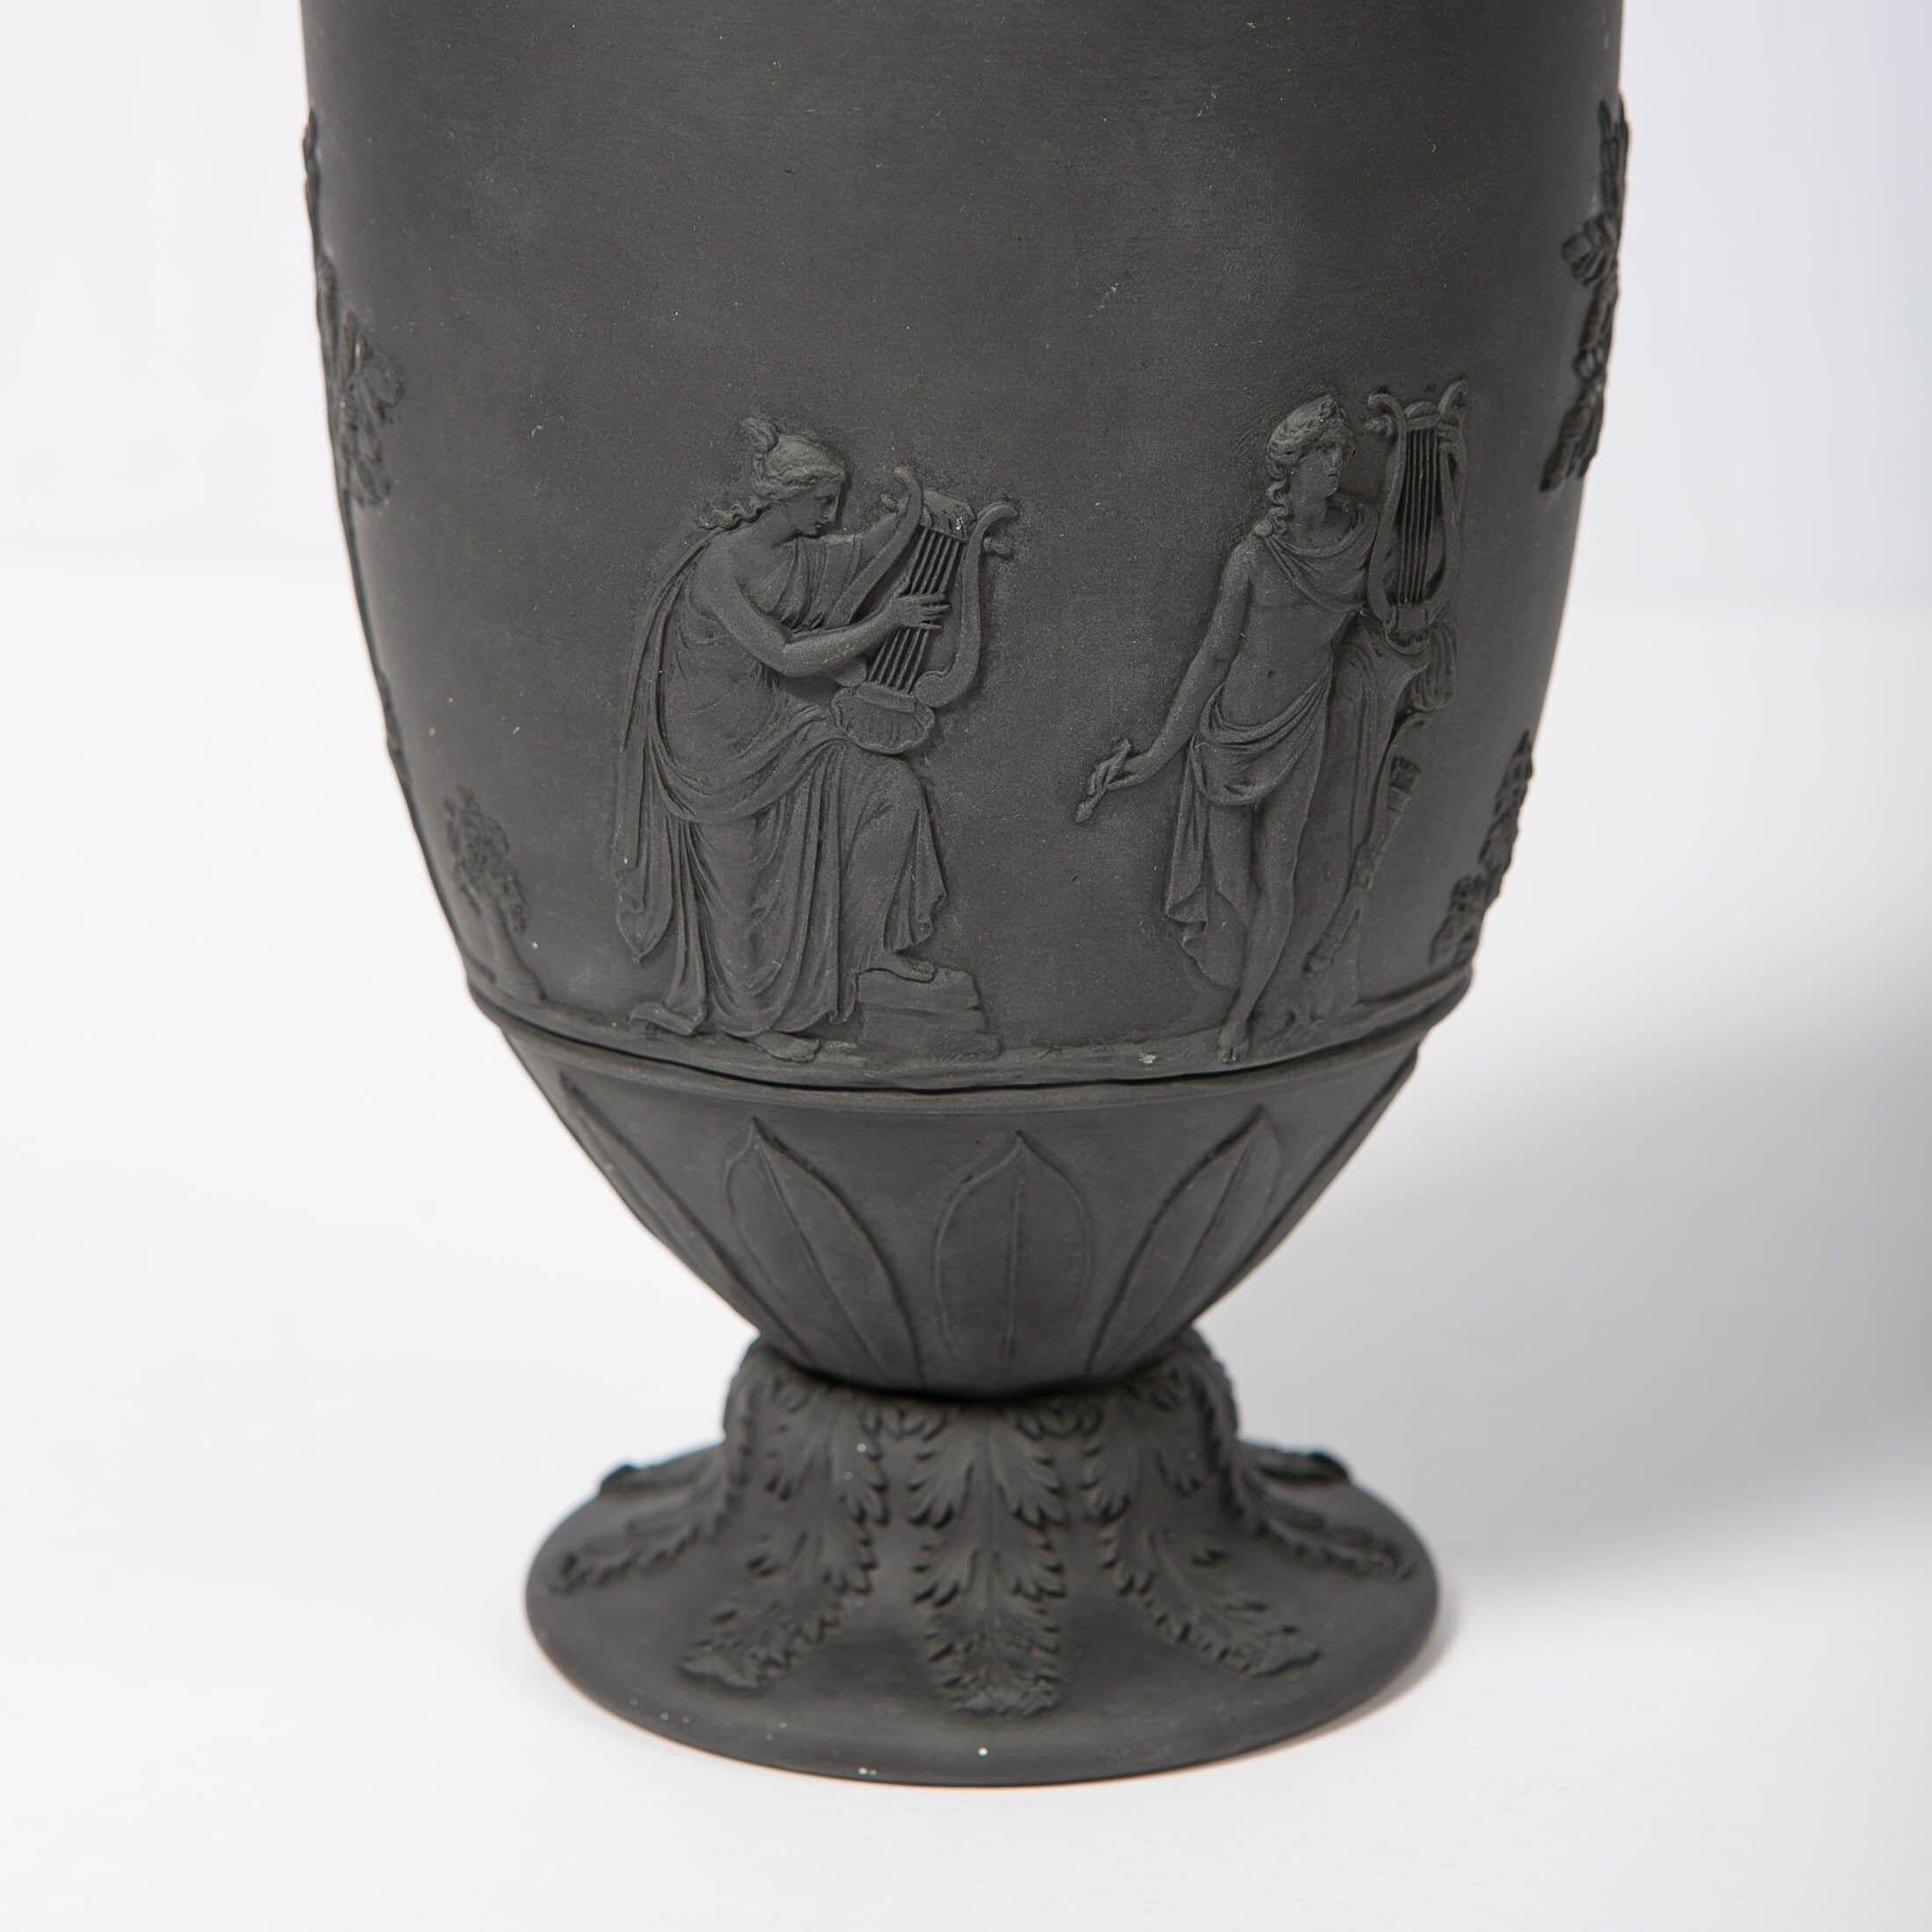 We are pleased to offer this Wedgwood black basalt vase decorated with neoclassical design. Made in England circa 1840, this double handled vase is molded in an ancient Greco-Roman shape.
It features classical figures with musical instruments, and